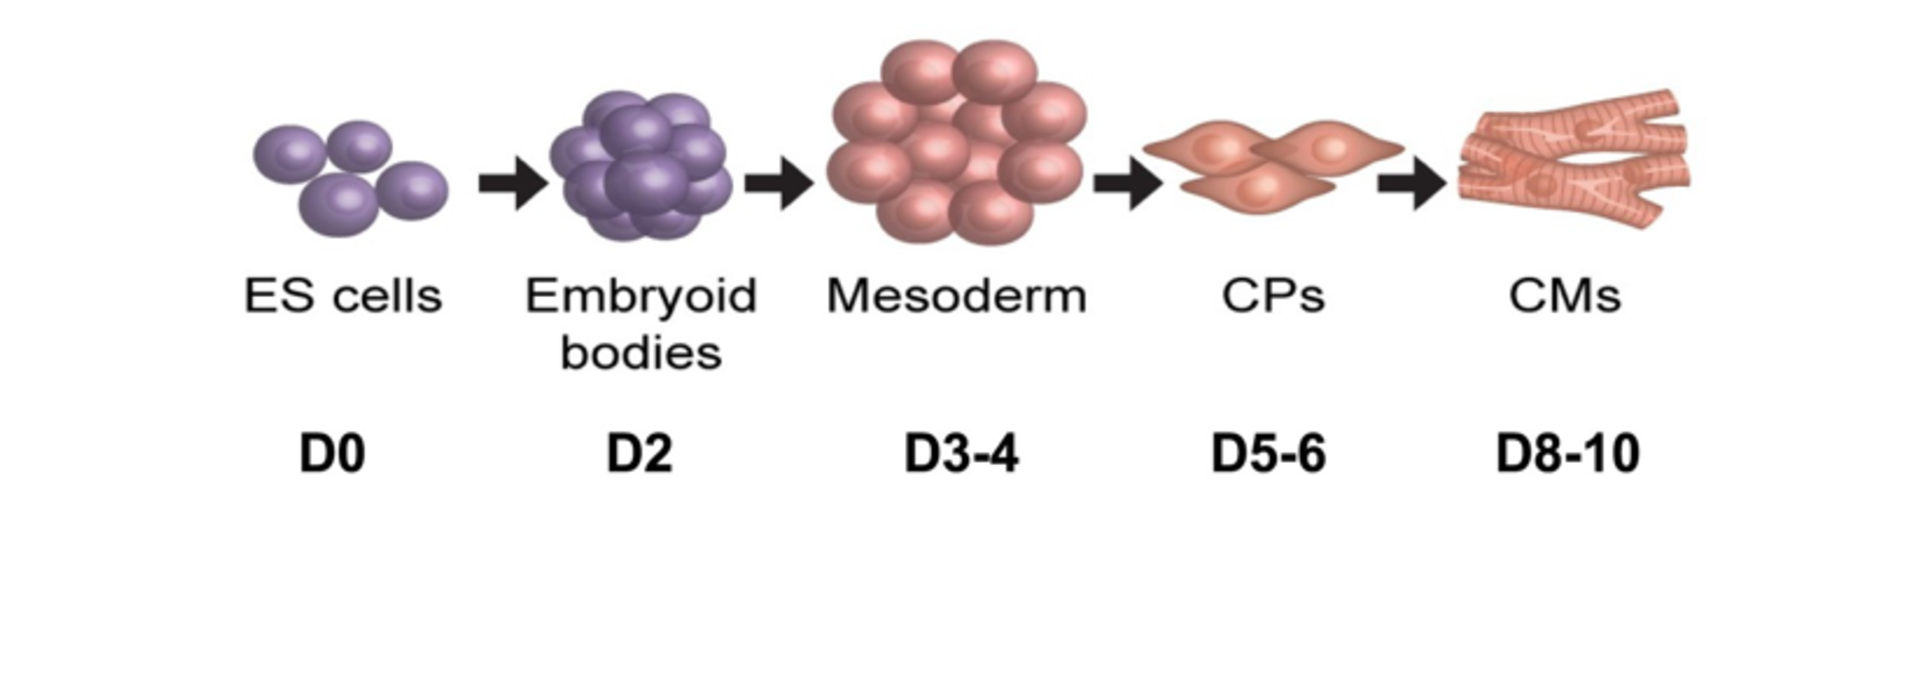 Stem cell differentiation to cardiomyocytes